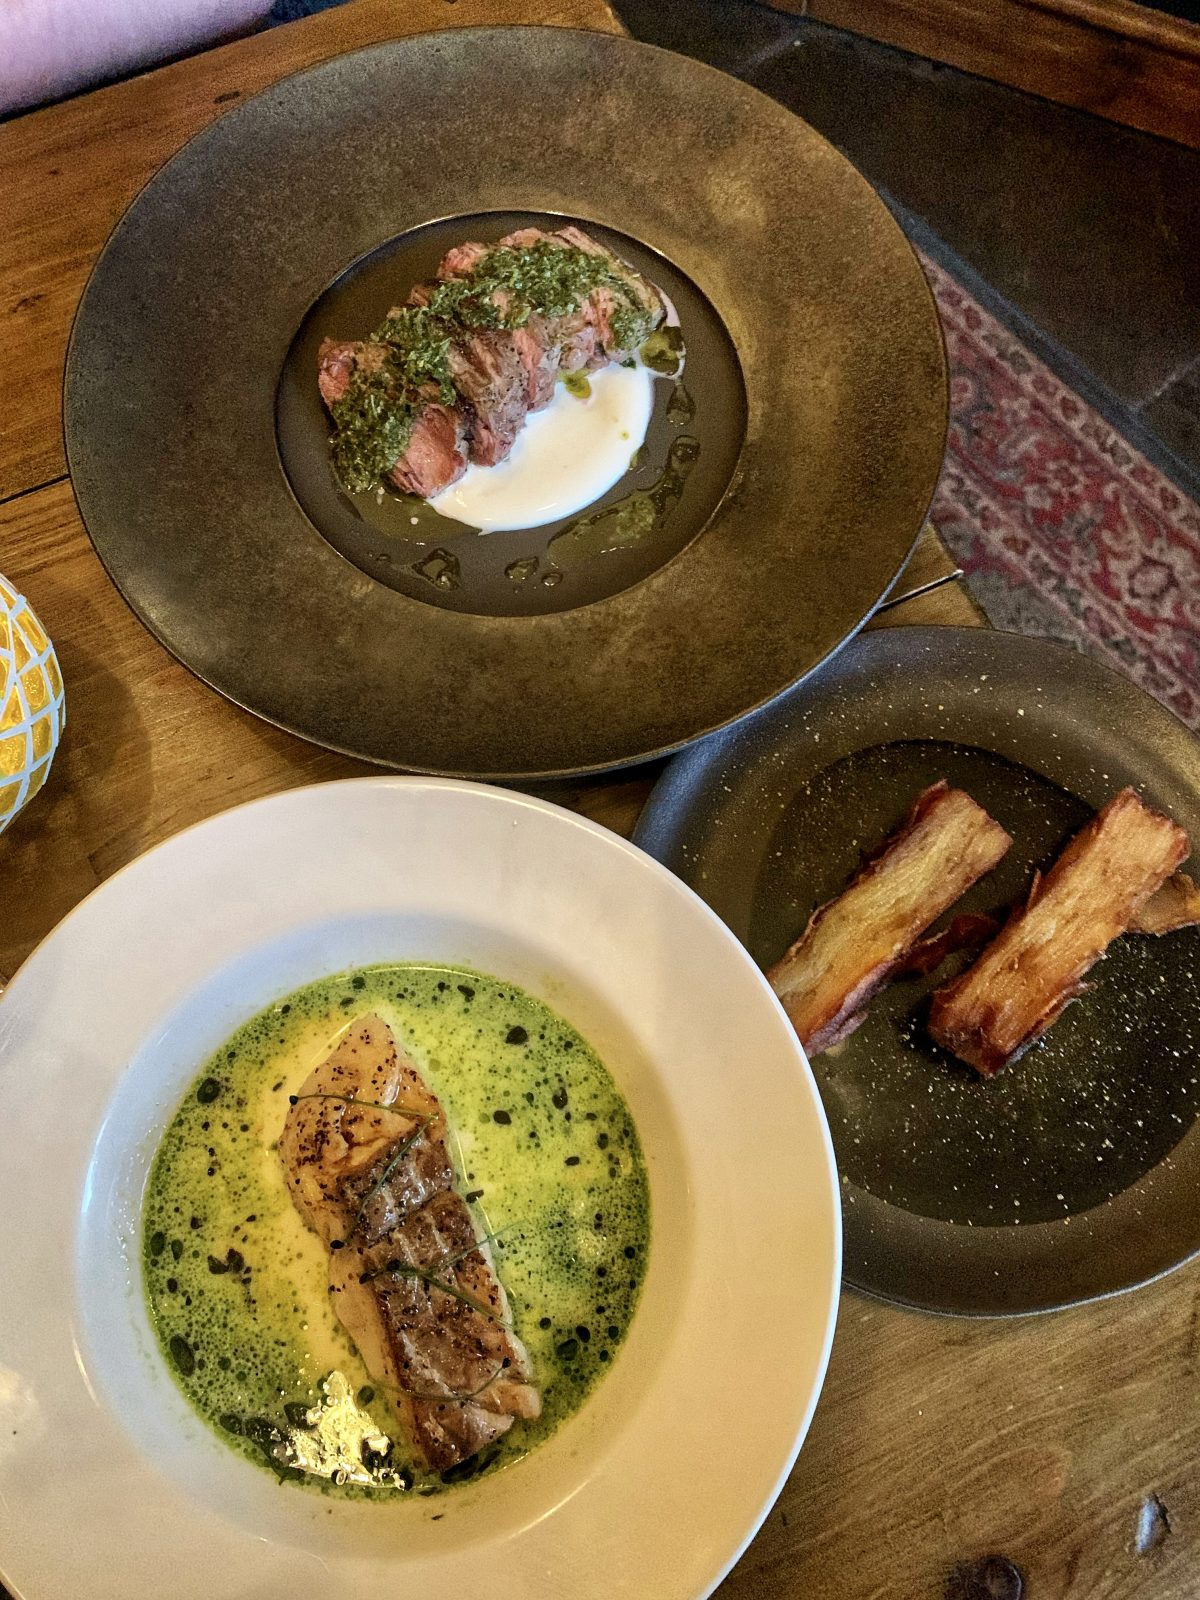 A selection of small plates made by the Dijon Boys.